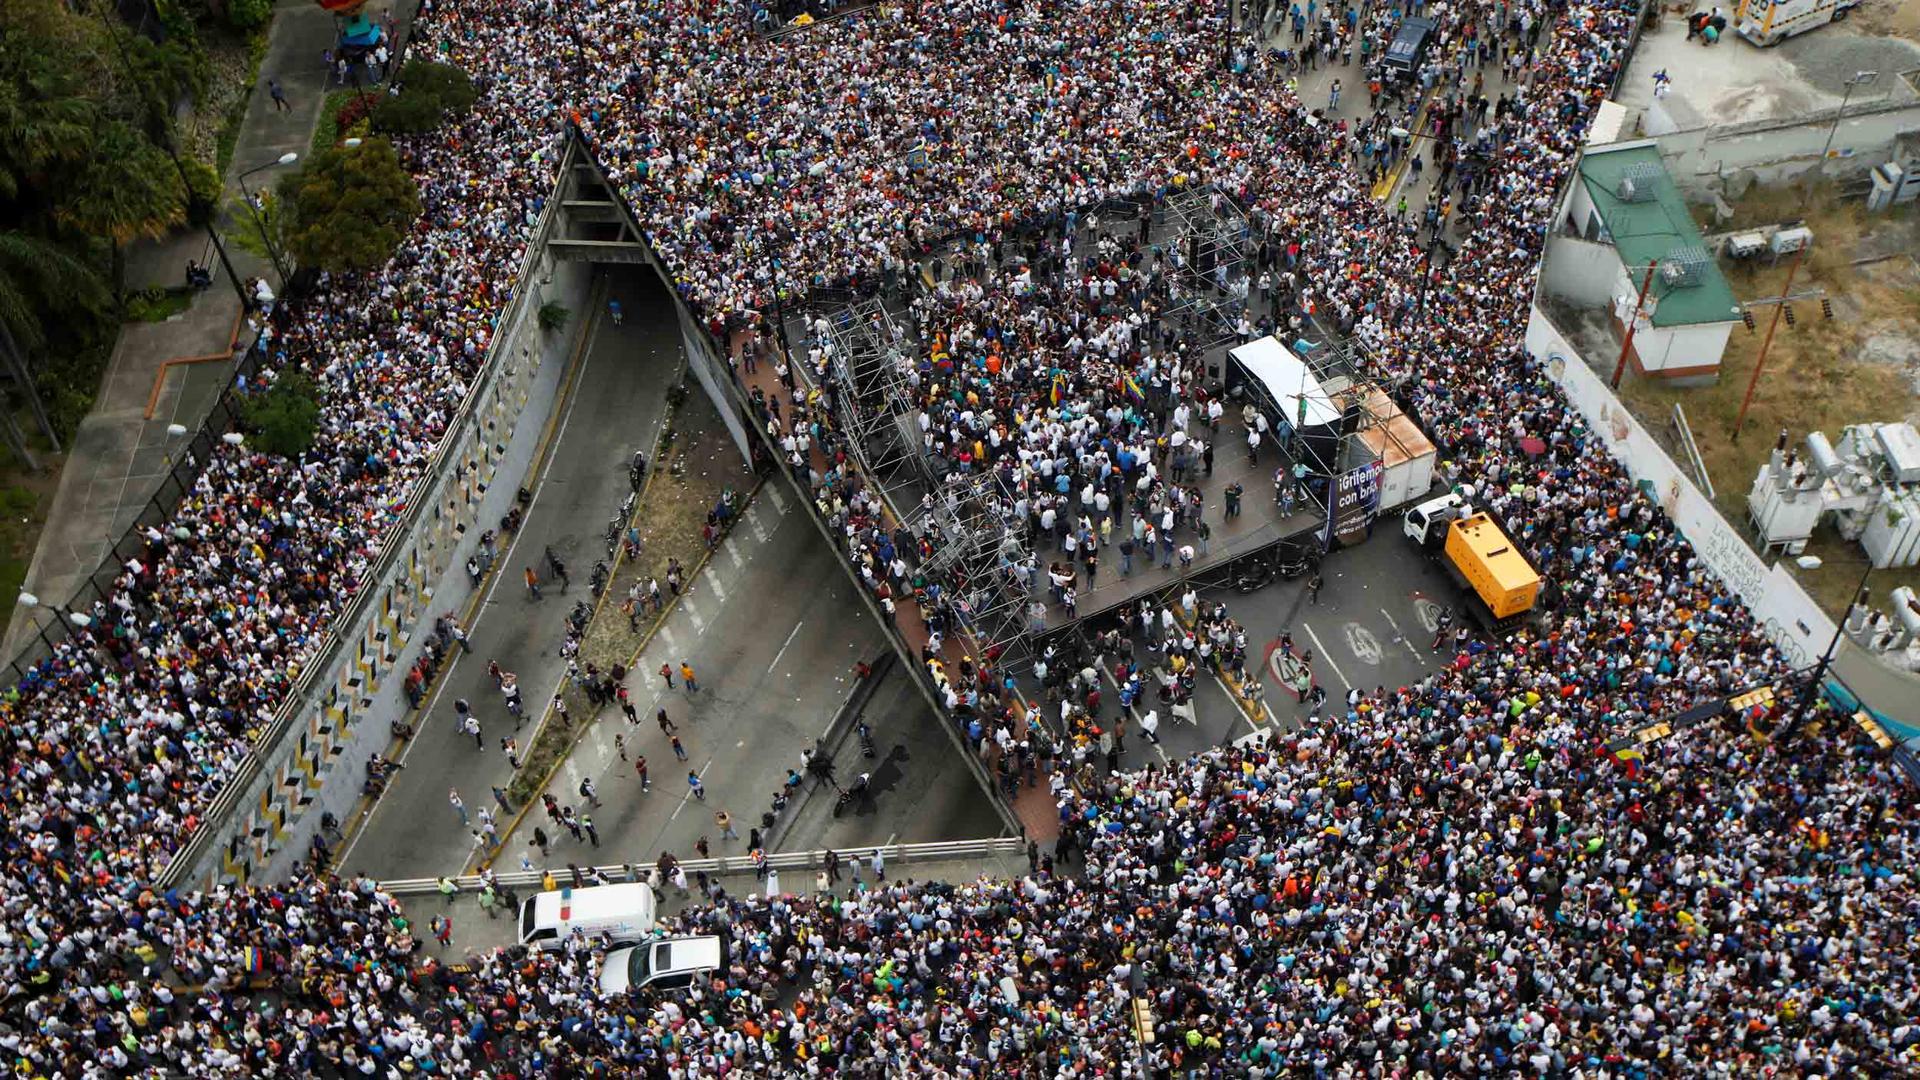 Thousands of people crowd roads in this overhead image of the opposition rally in Caracas